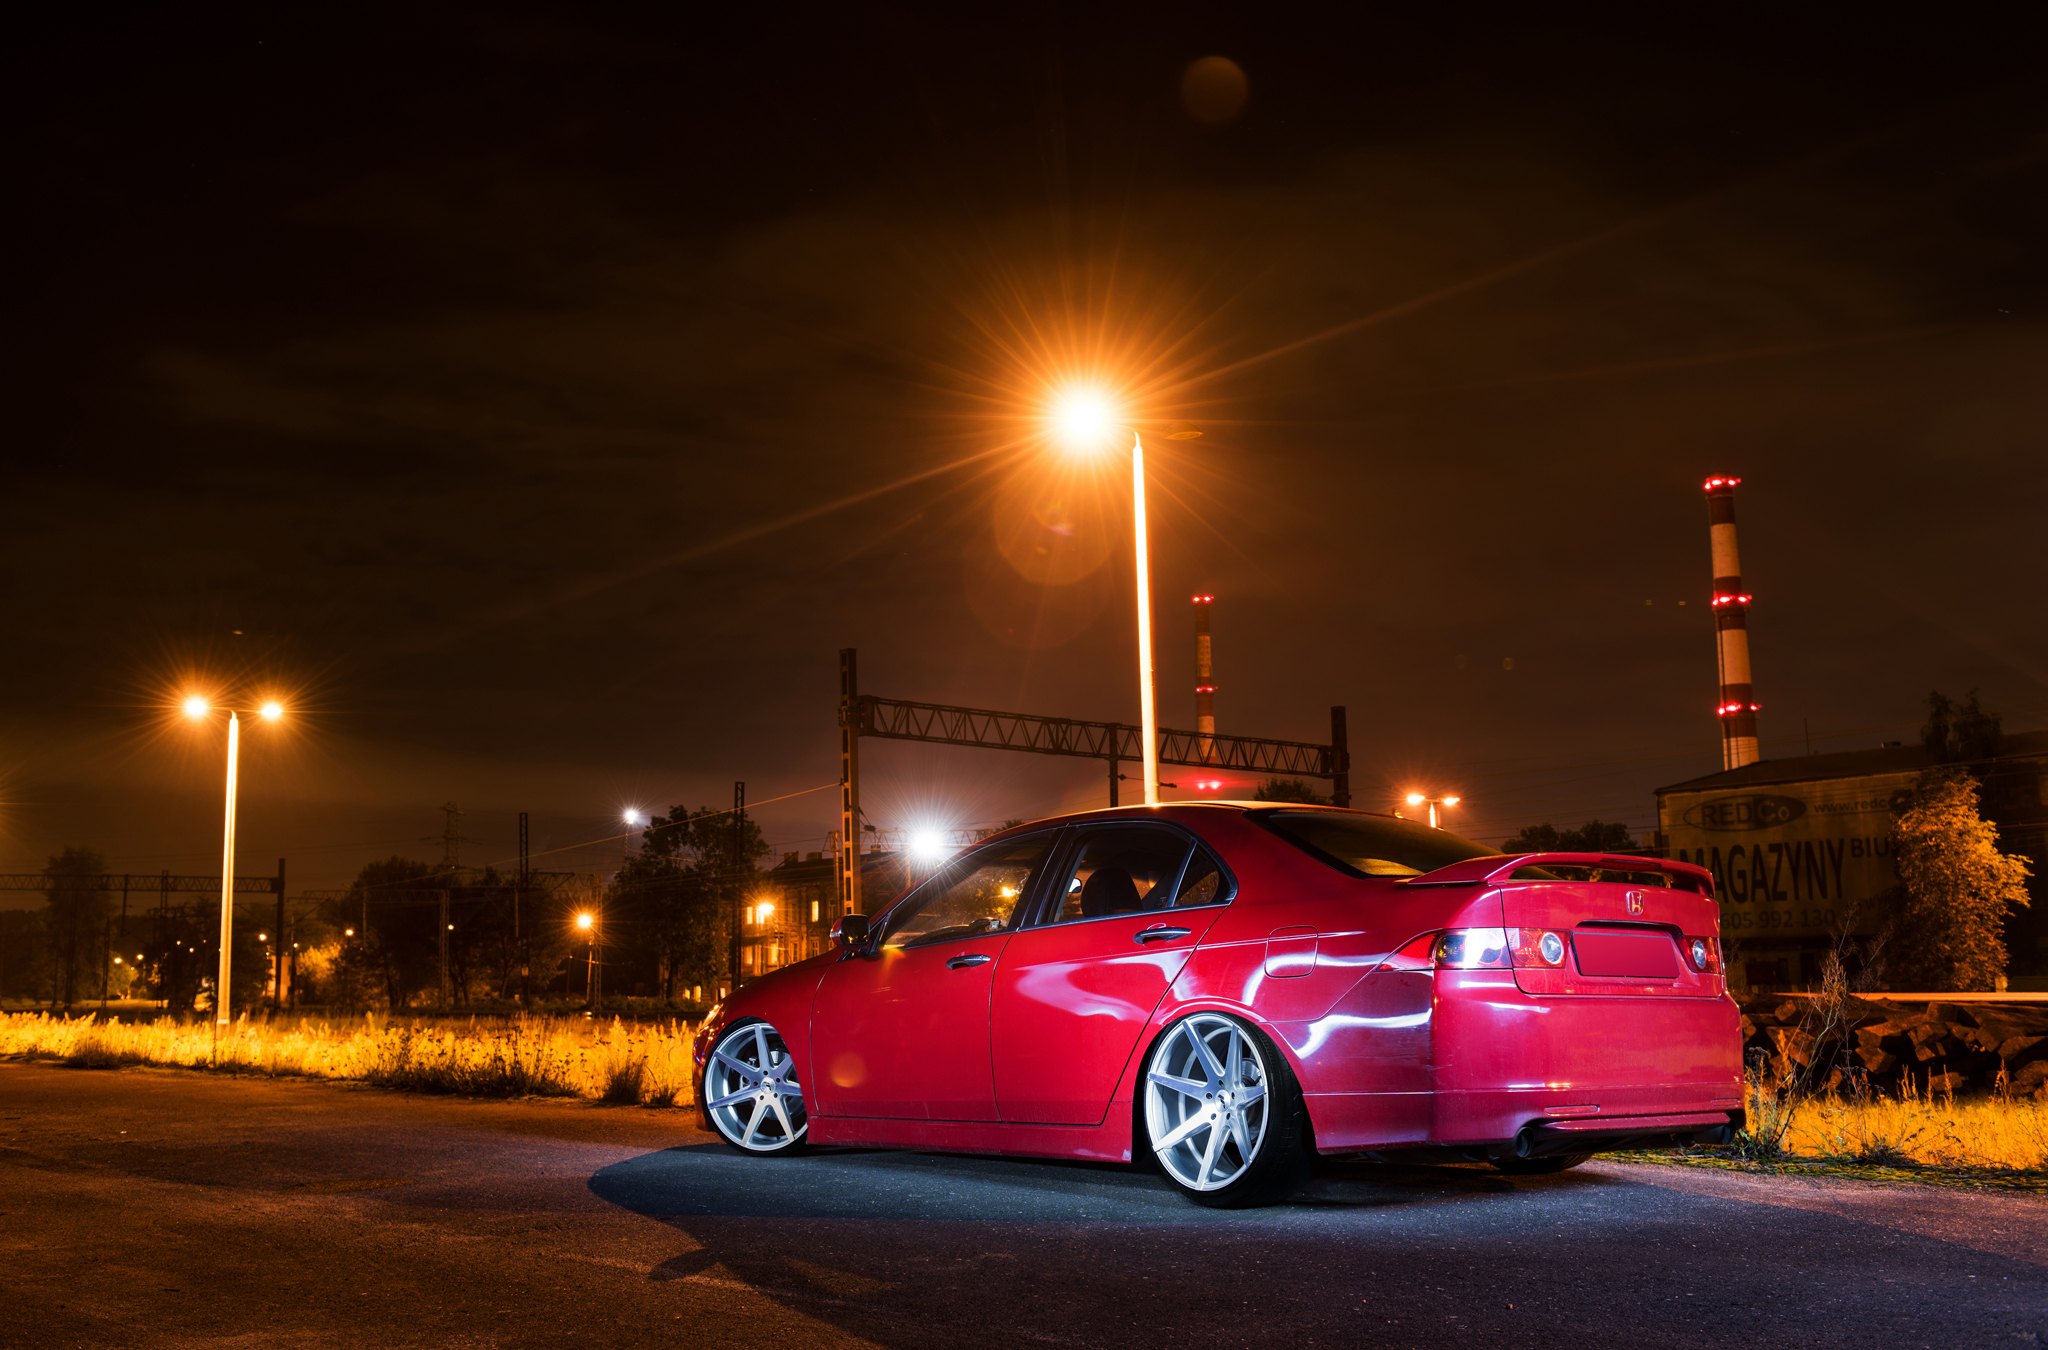 Aftermarket Rear Diffuser on Red Honda Accord - Photo by JR Wheels